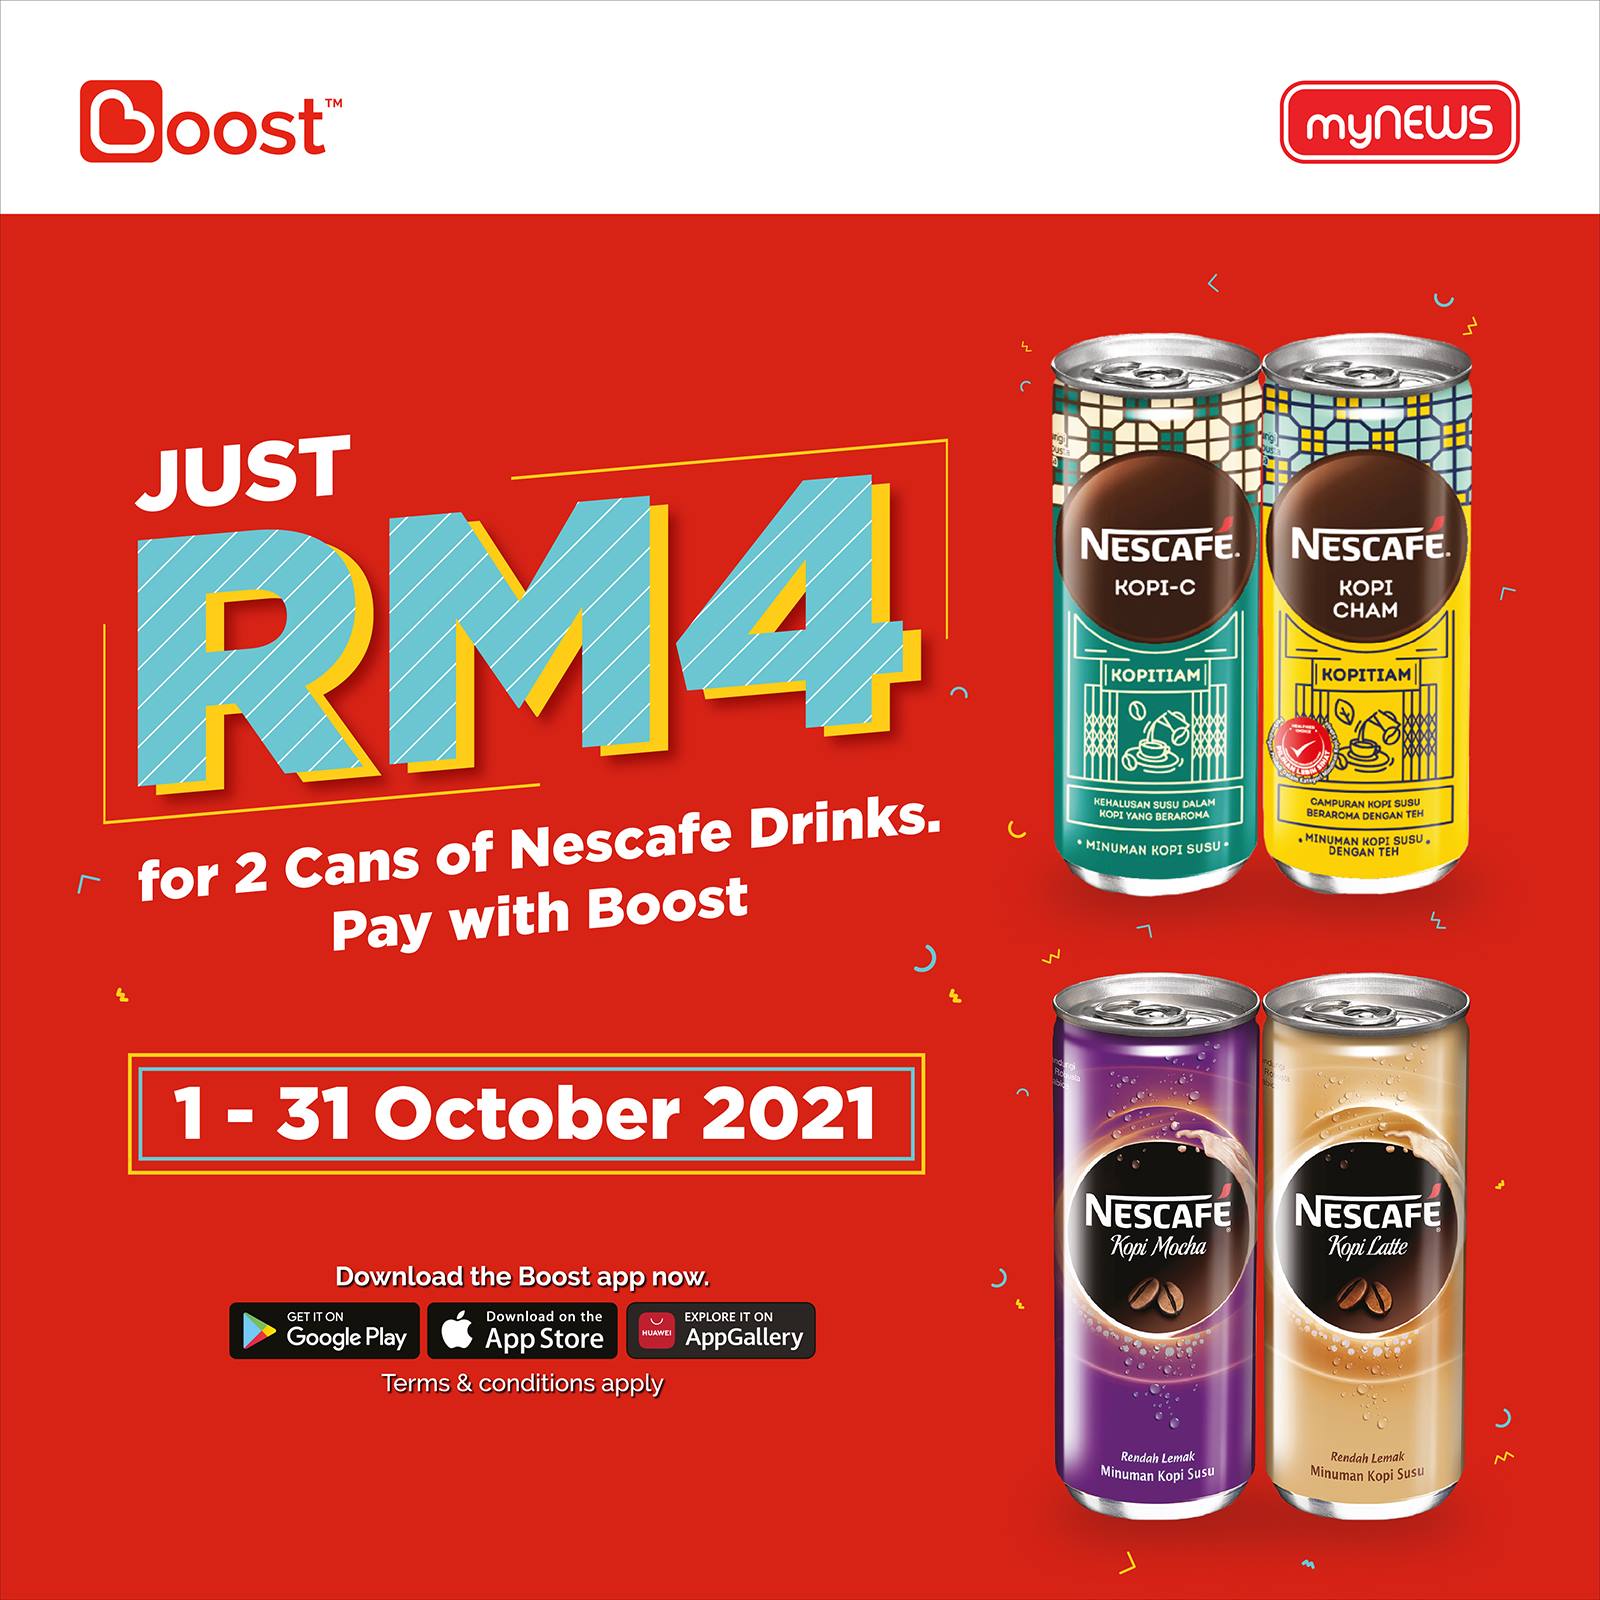 Pay RM4 with Boost for 2 Cans of Nescafe Drinks at myNEWS